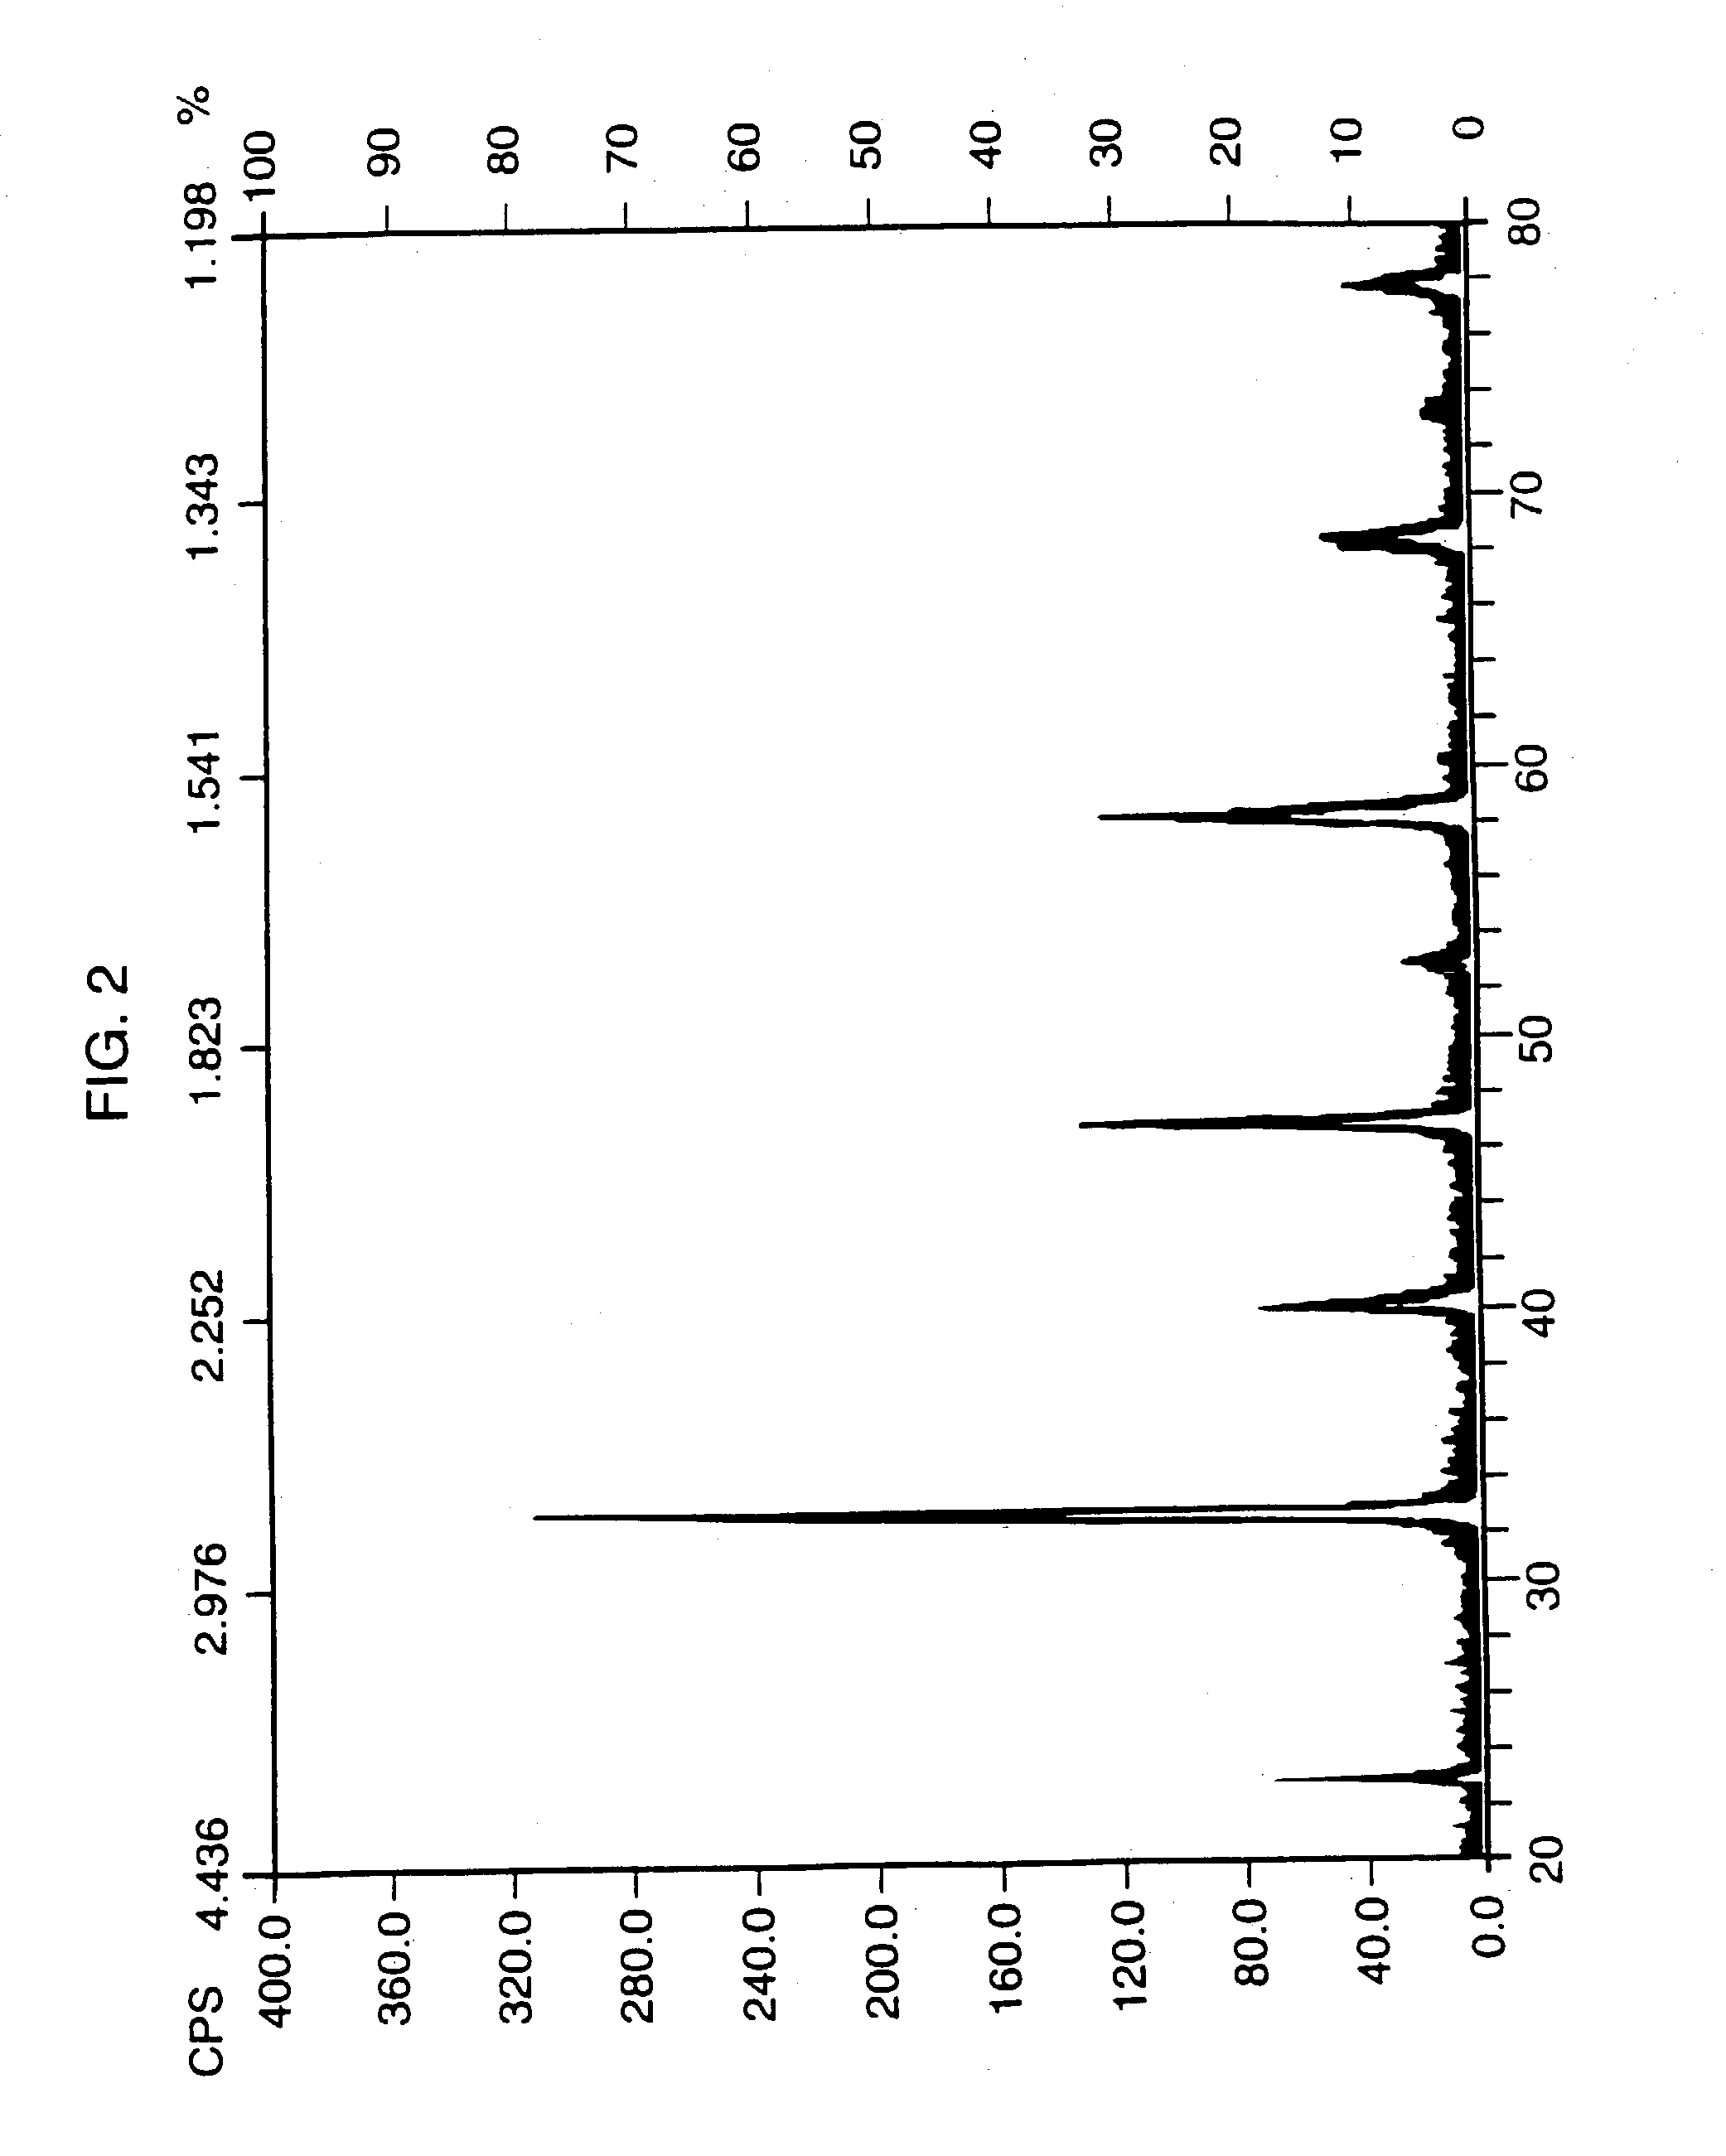 Perovskite-type metal oxide compounds and methods of making and using thereof